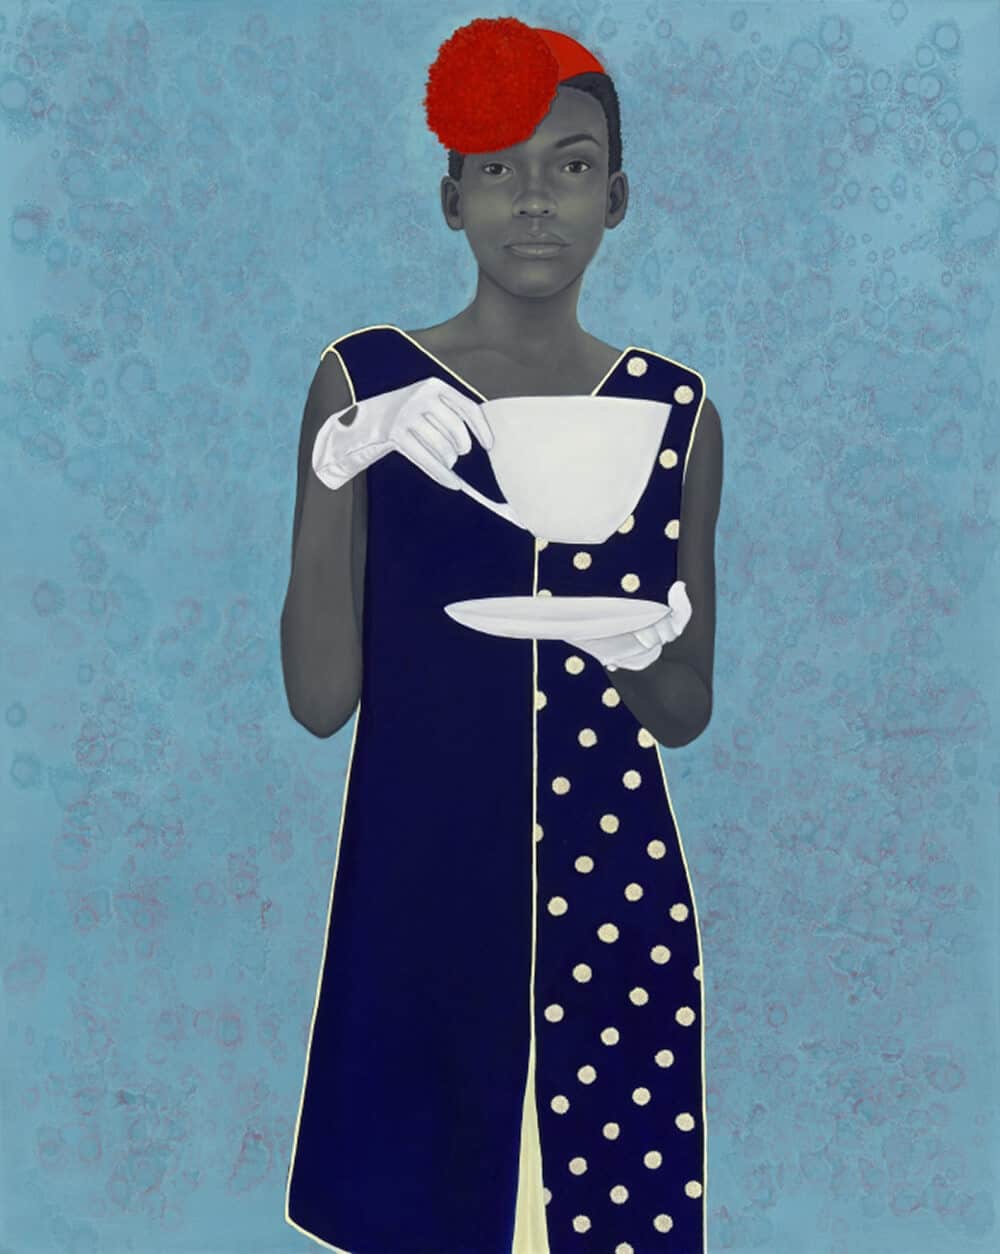 Miss Everything (Unsuppressed Deliverance) by Amy Sherald, oil on canvas, 2013. Courtesy of Frances & Burton Reifler © Amy Sherald. 